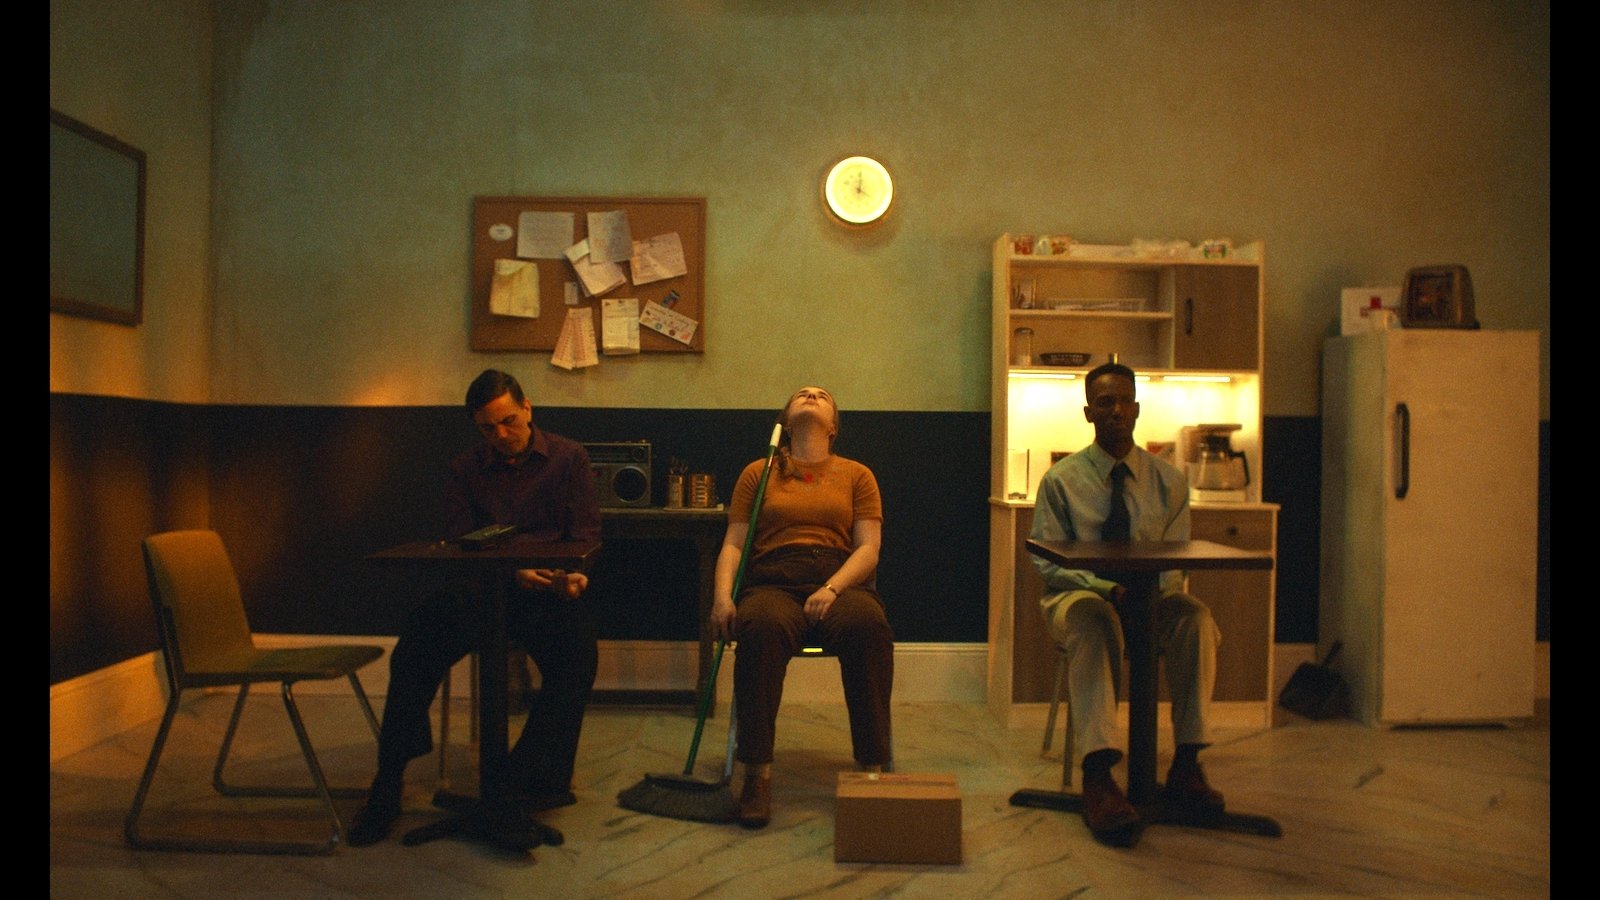 Three people sit in a grim, sickly-colored room in three separate chairs facing thwe camera, with a glowing clock that maybe reads 4:00 on the wall behind them; two men are on either side of a woman, who sits in then middle with her head back in exasperation and holds a pushbroom.